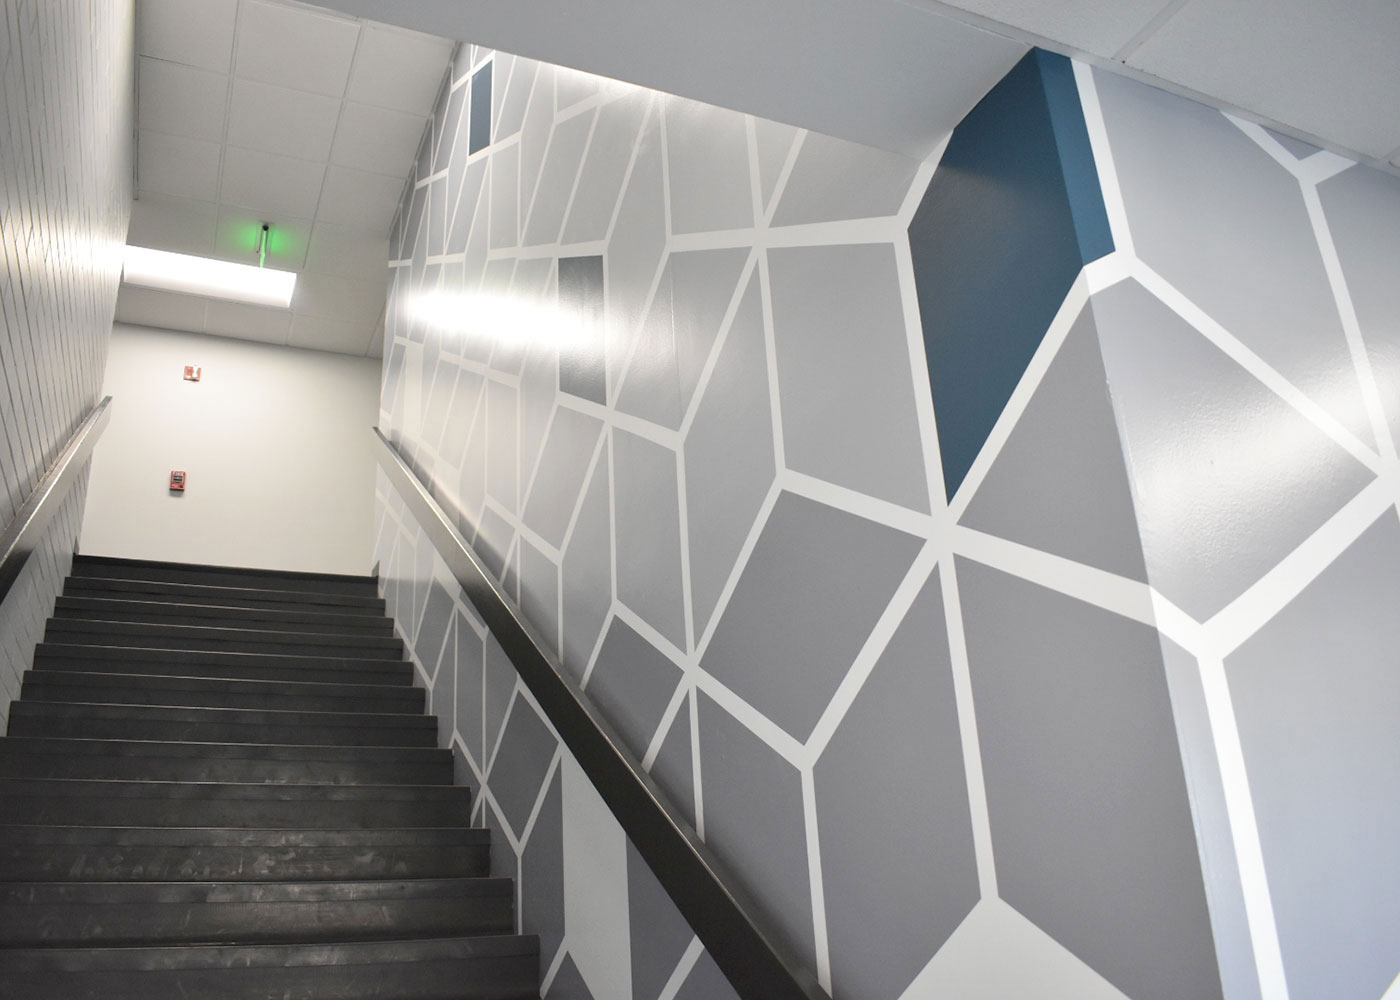 Multiple buildings received interior vinyl wall graphics in common space areas and long hallways featuring a variety of floor-to-ceiling designs.